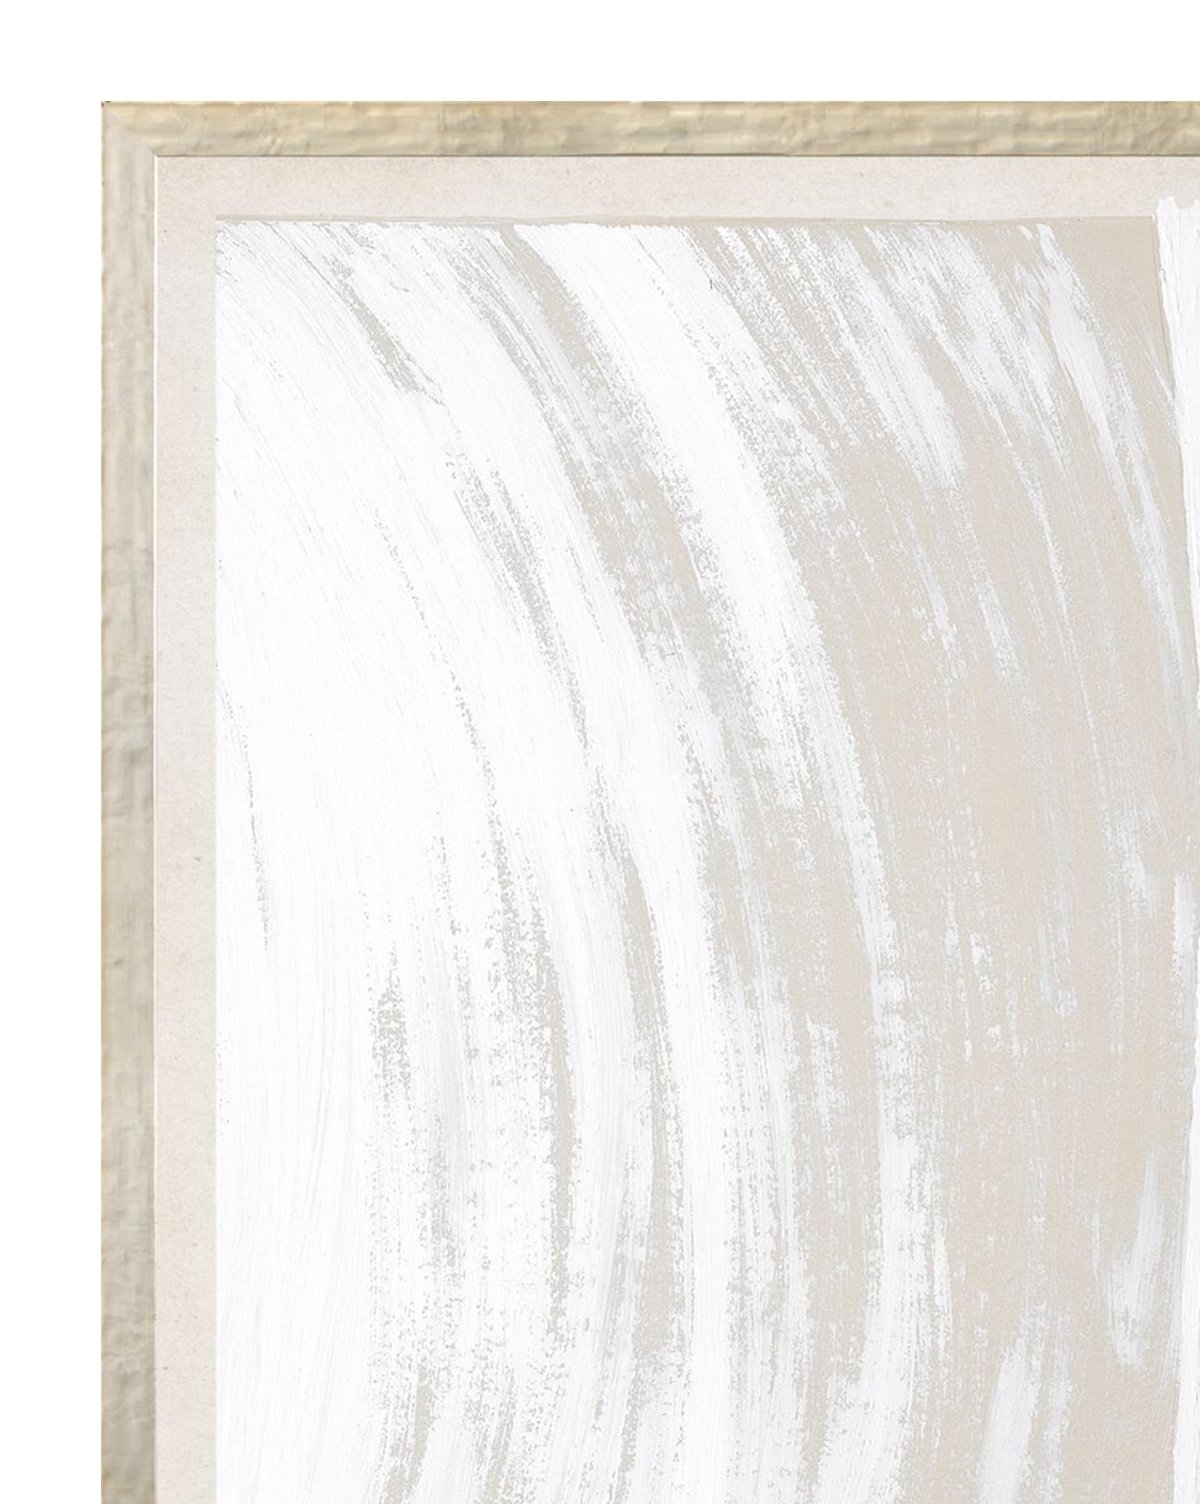 BEIGE ABSTRACT 4 Framed Art - 13" W x 17" H - Image 1